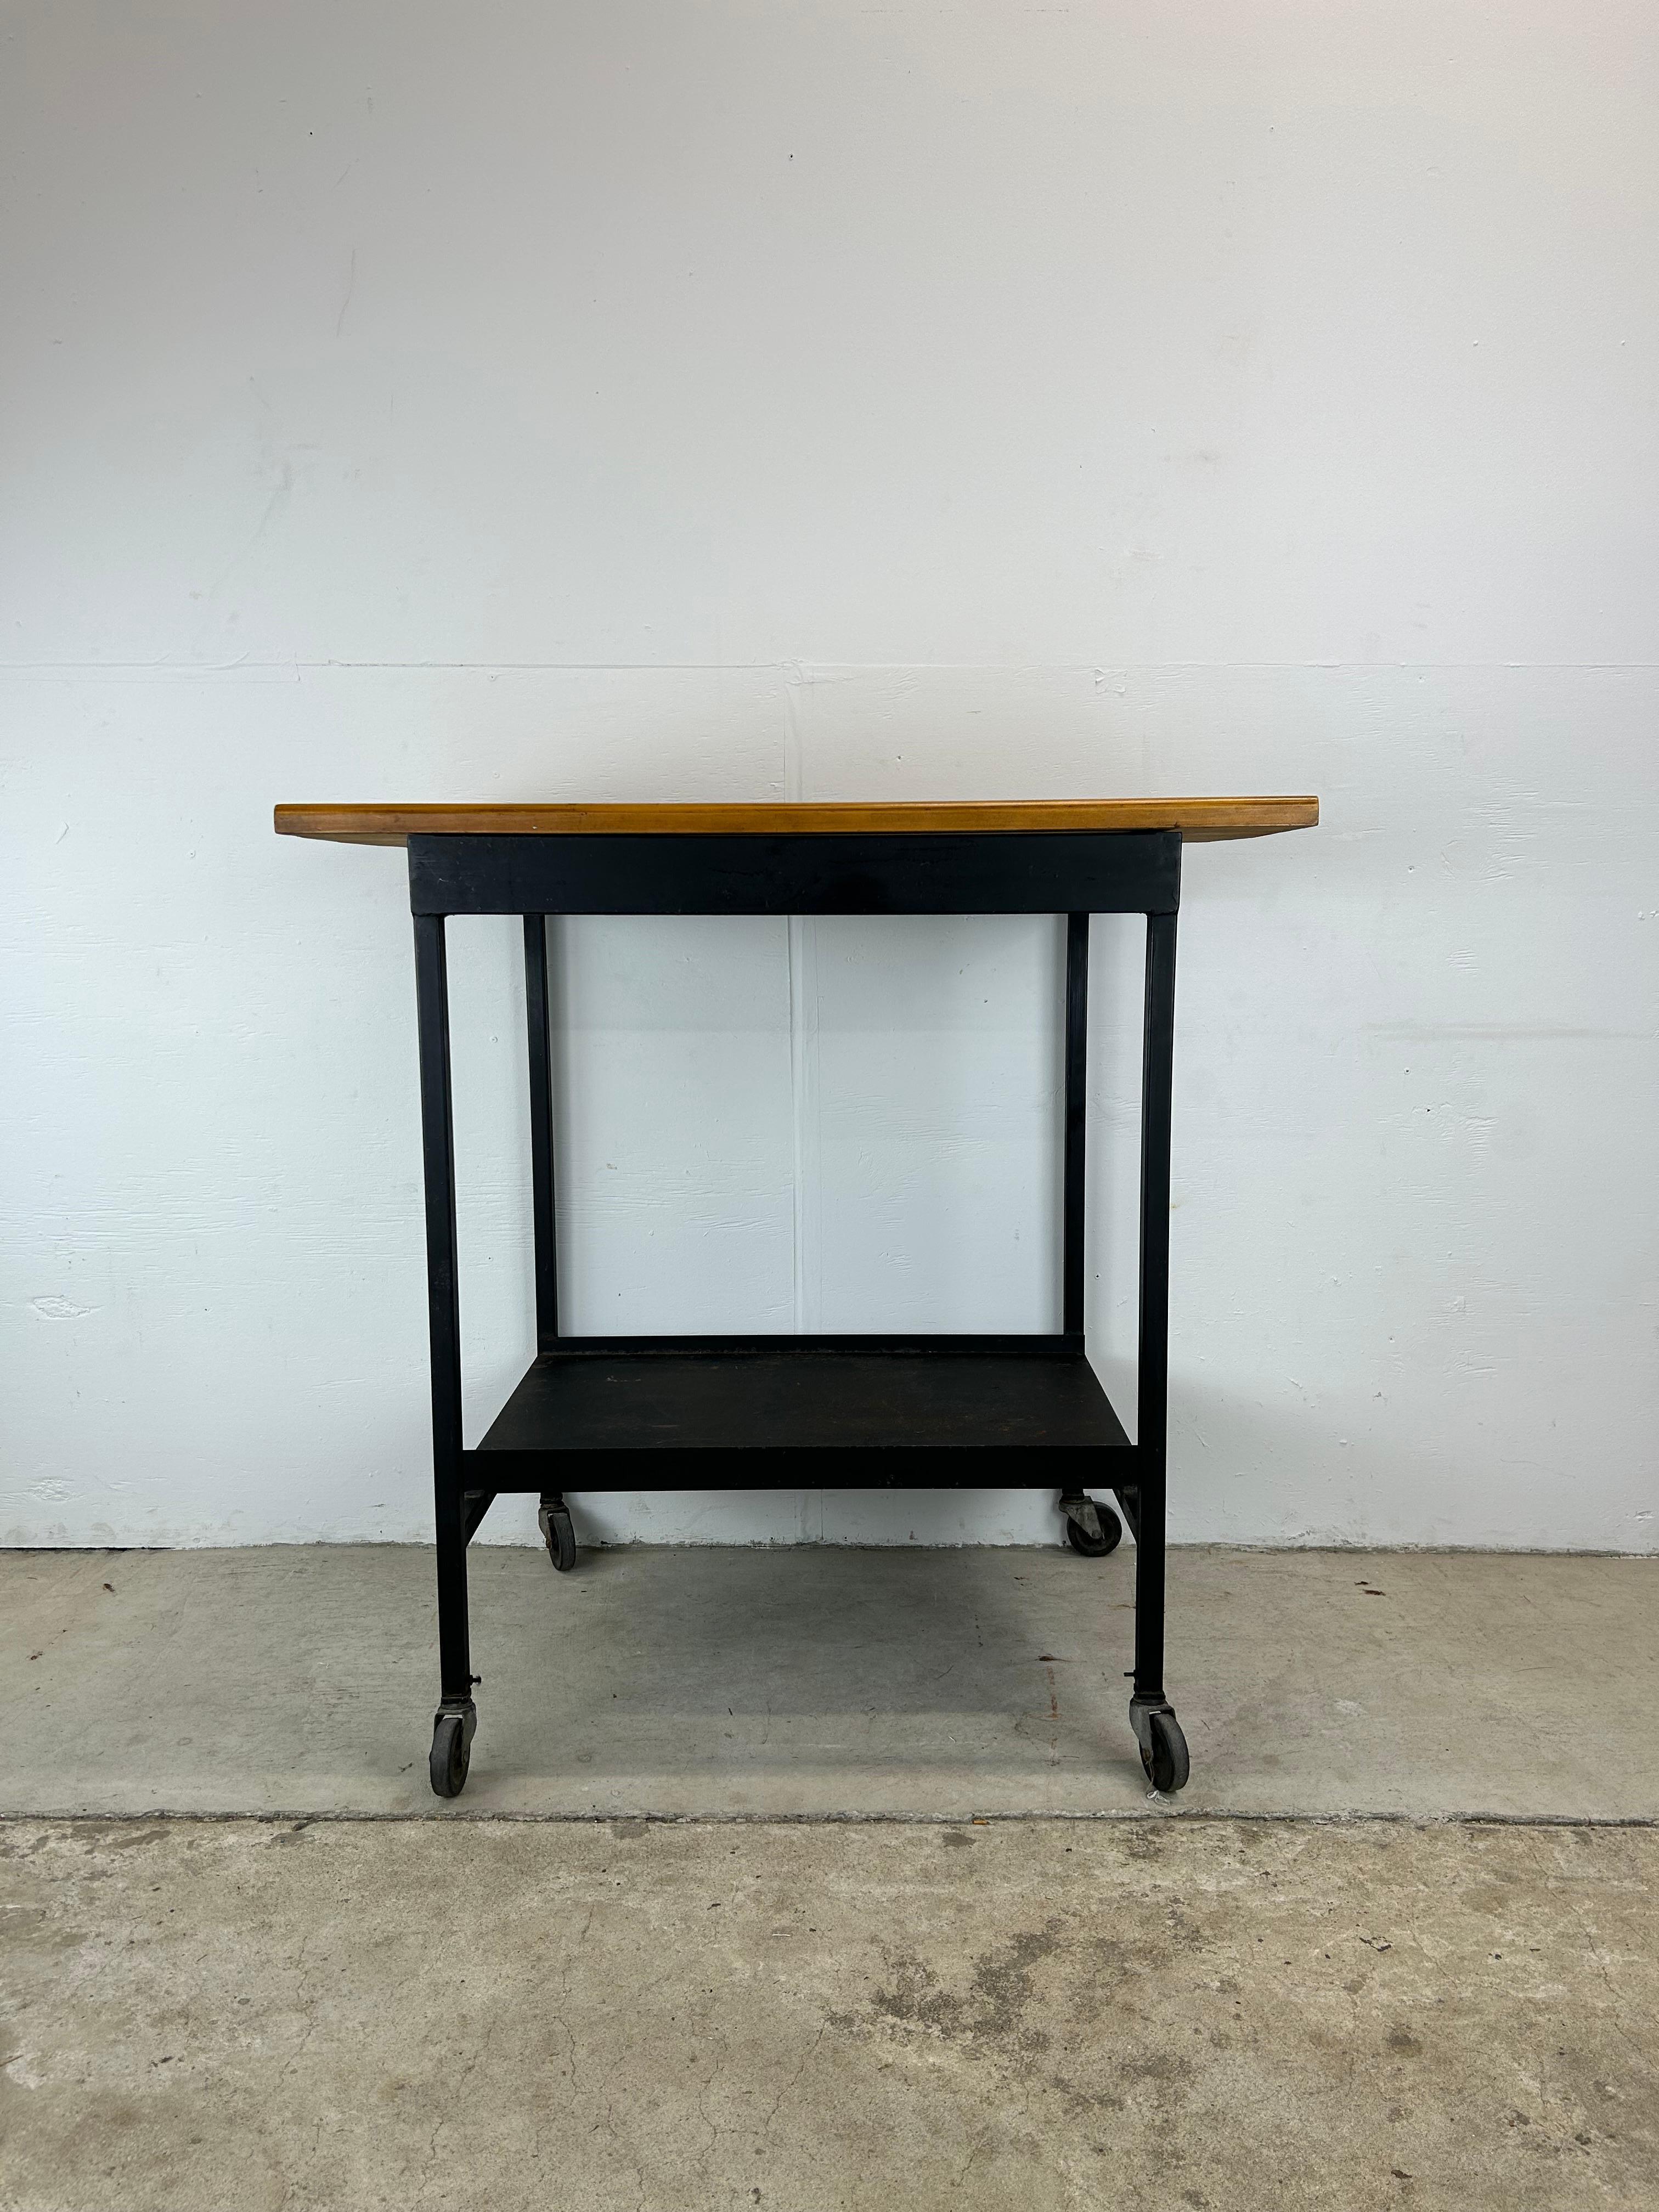 This industrial bar cart features butcher block style top, black painted metal shelf, frame and wheeled base.

Knee height: 36 inches.

Complimentary pair of industrial style bar stools available separately.

Dimensions: 40w 24d 40h 36kh

Condition: